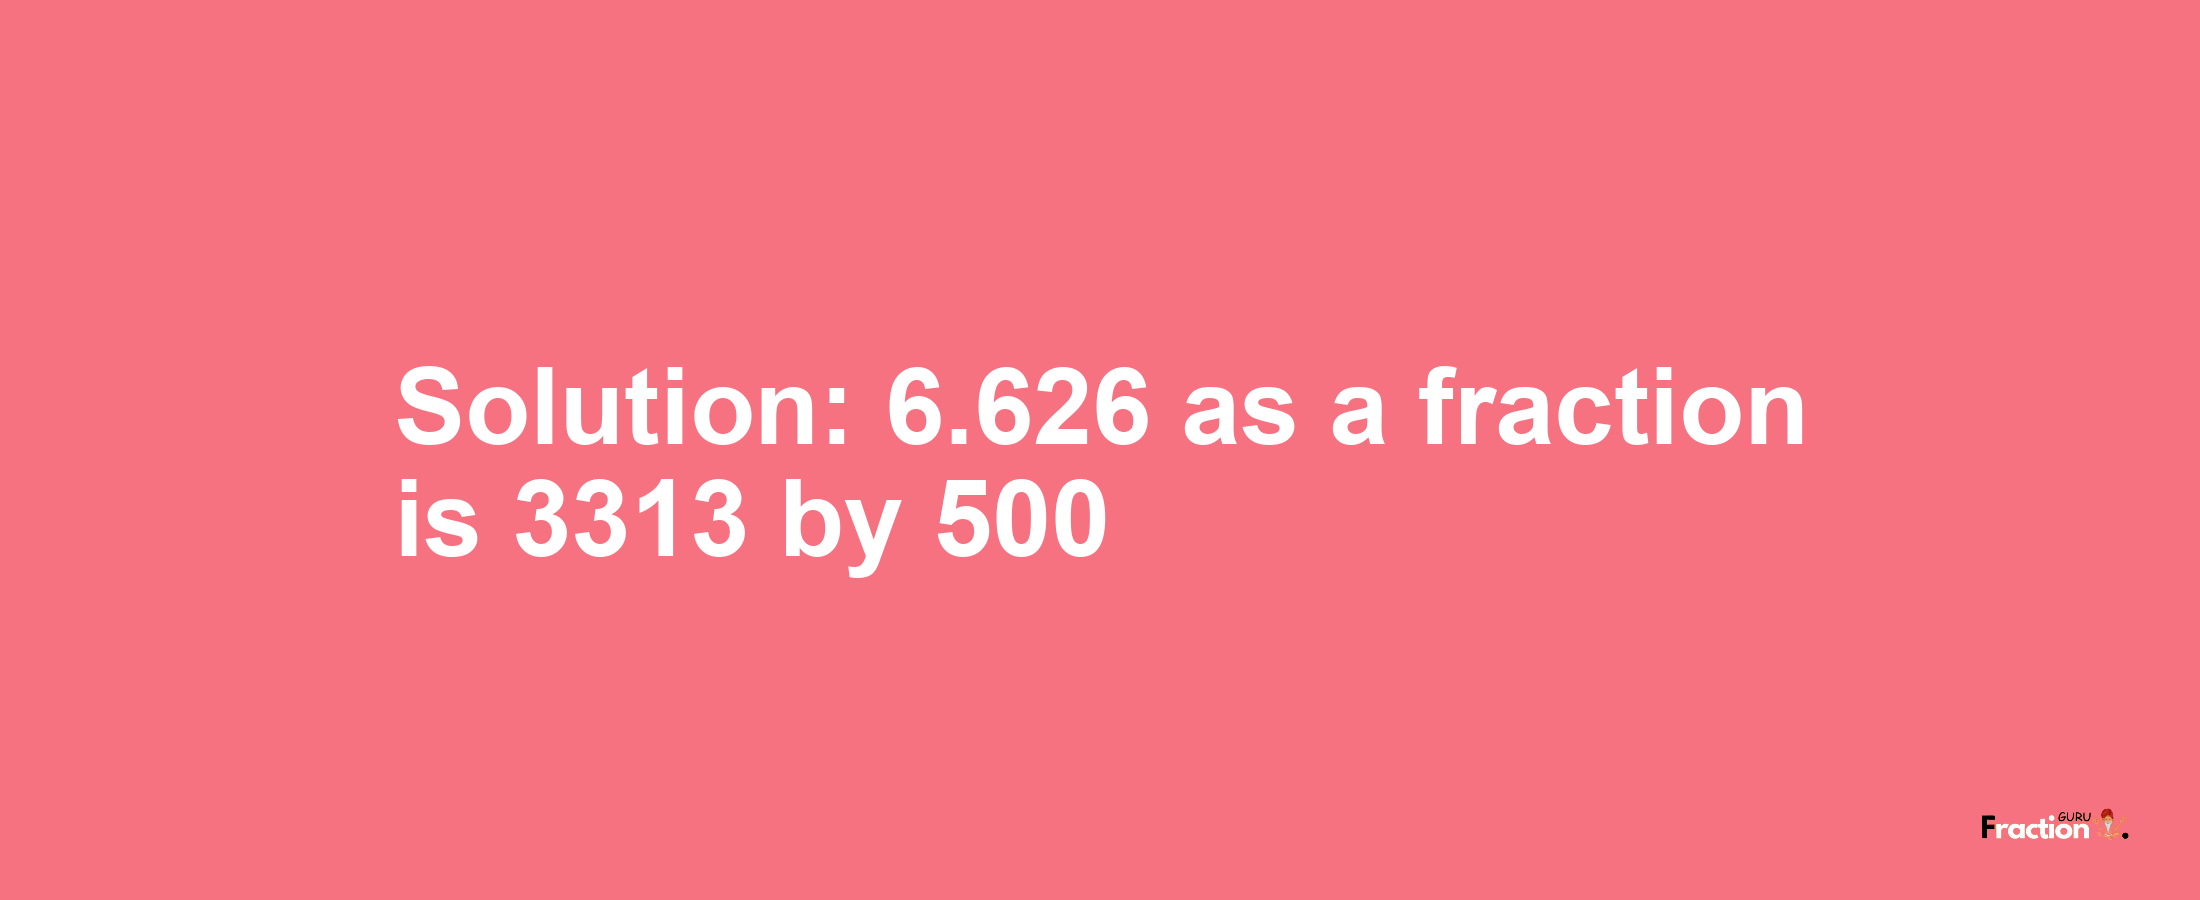 Solution:6.626 as a fraction is 3313/500